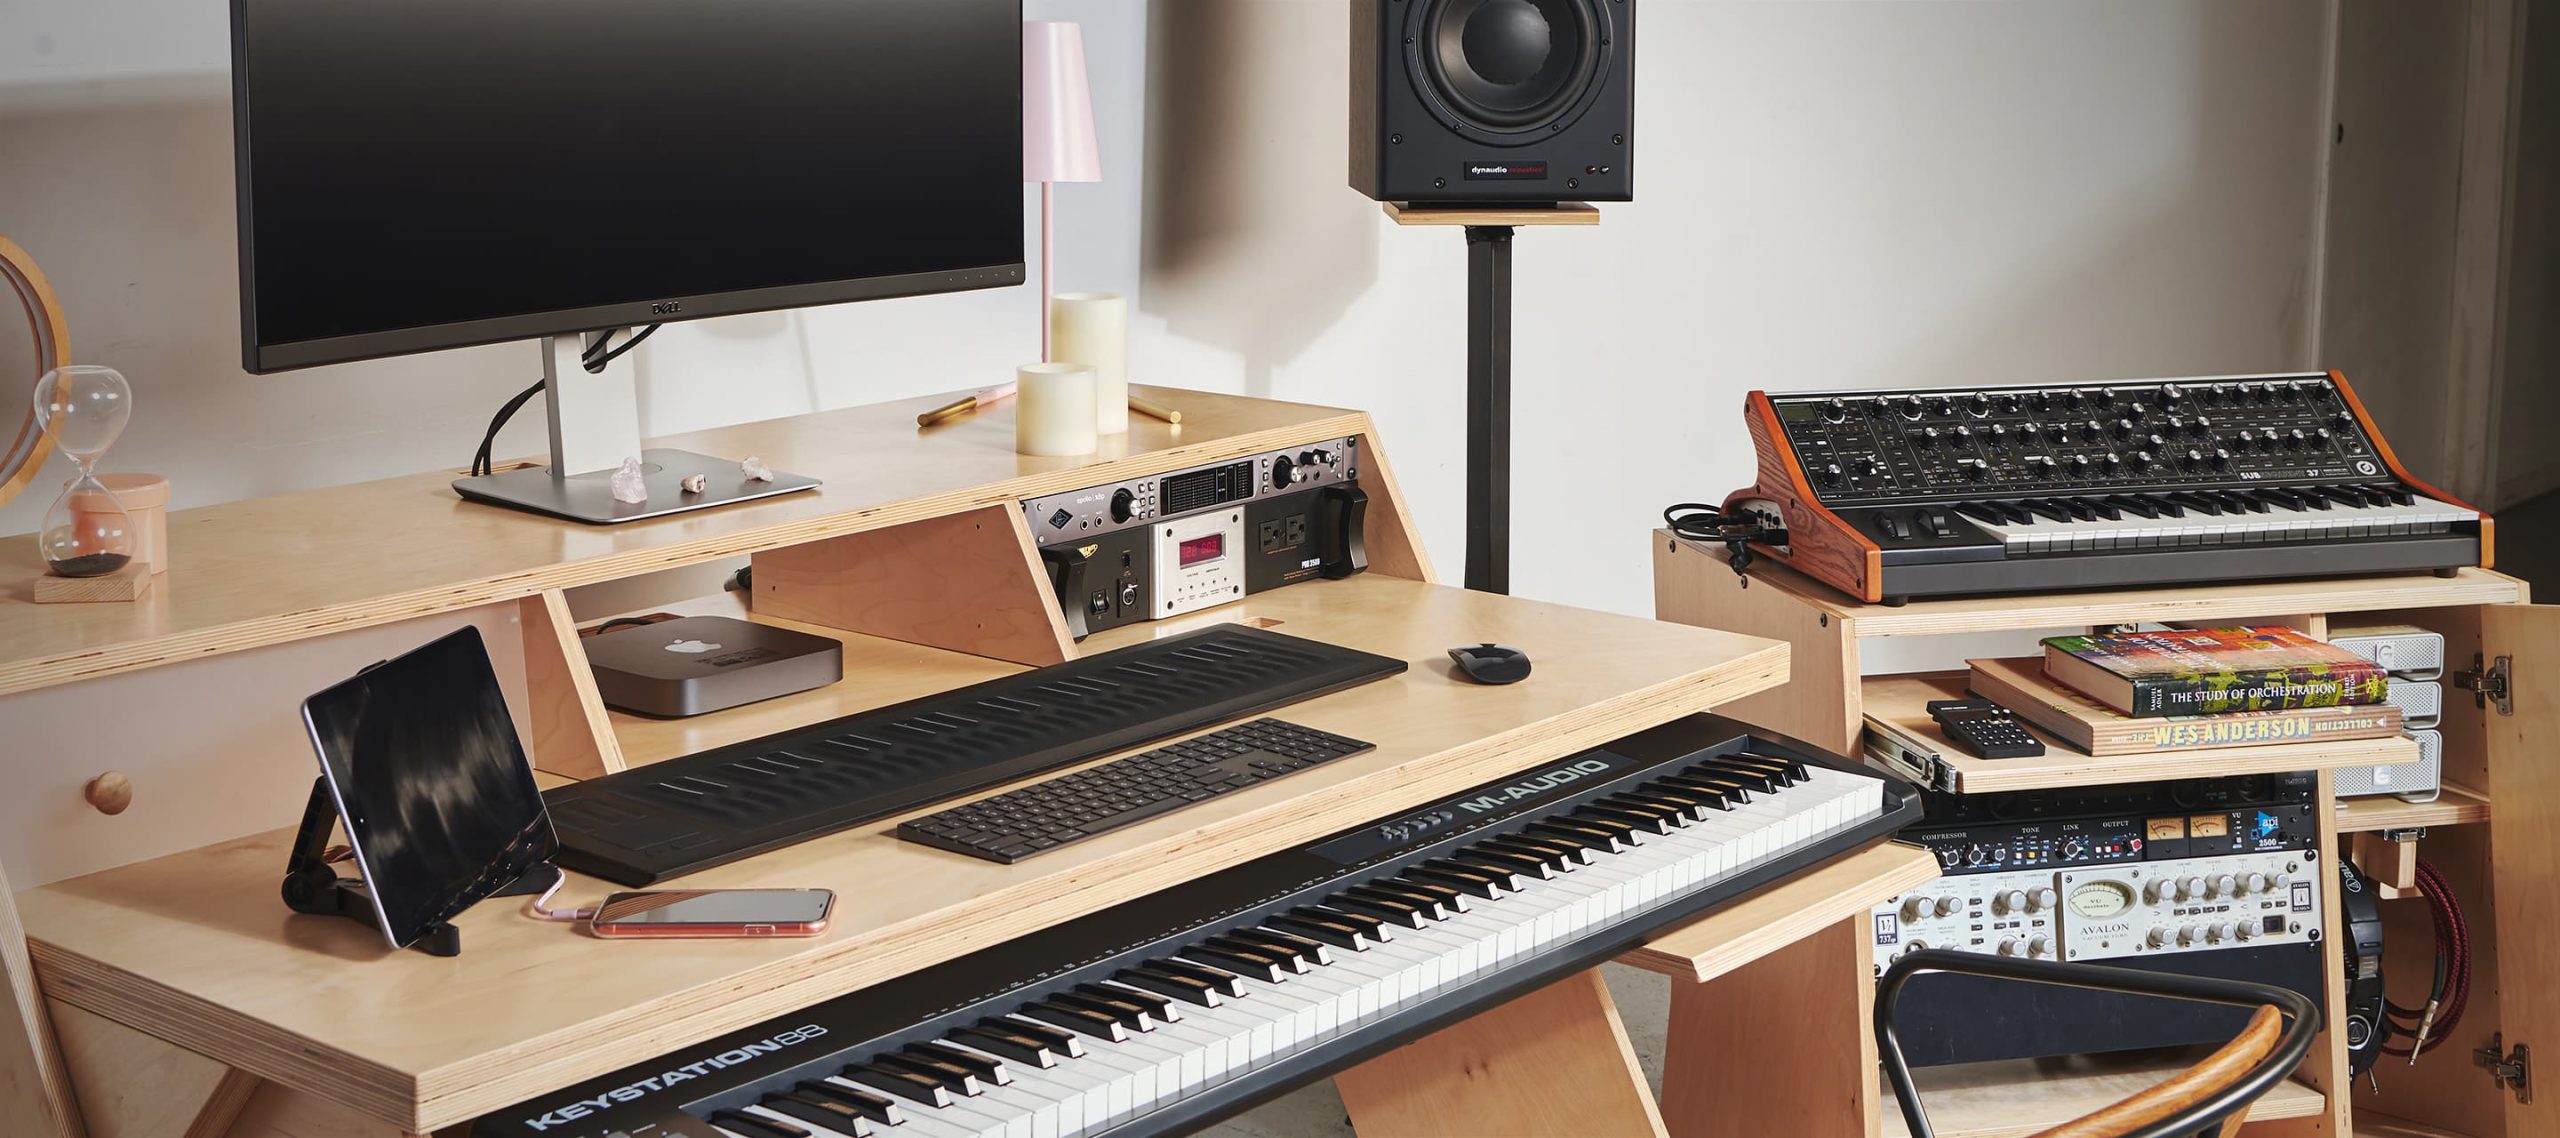 Output natural color Platform desk with Output natural color Sidecar accessory holding preamps, MIDI keyboard, and display monitor.